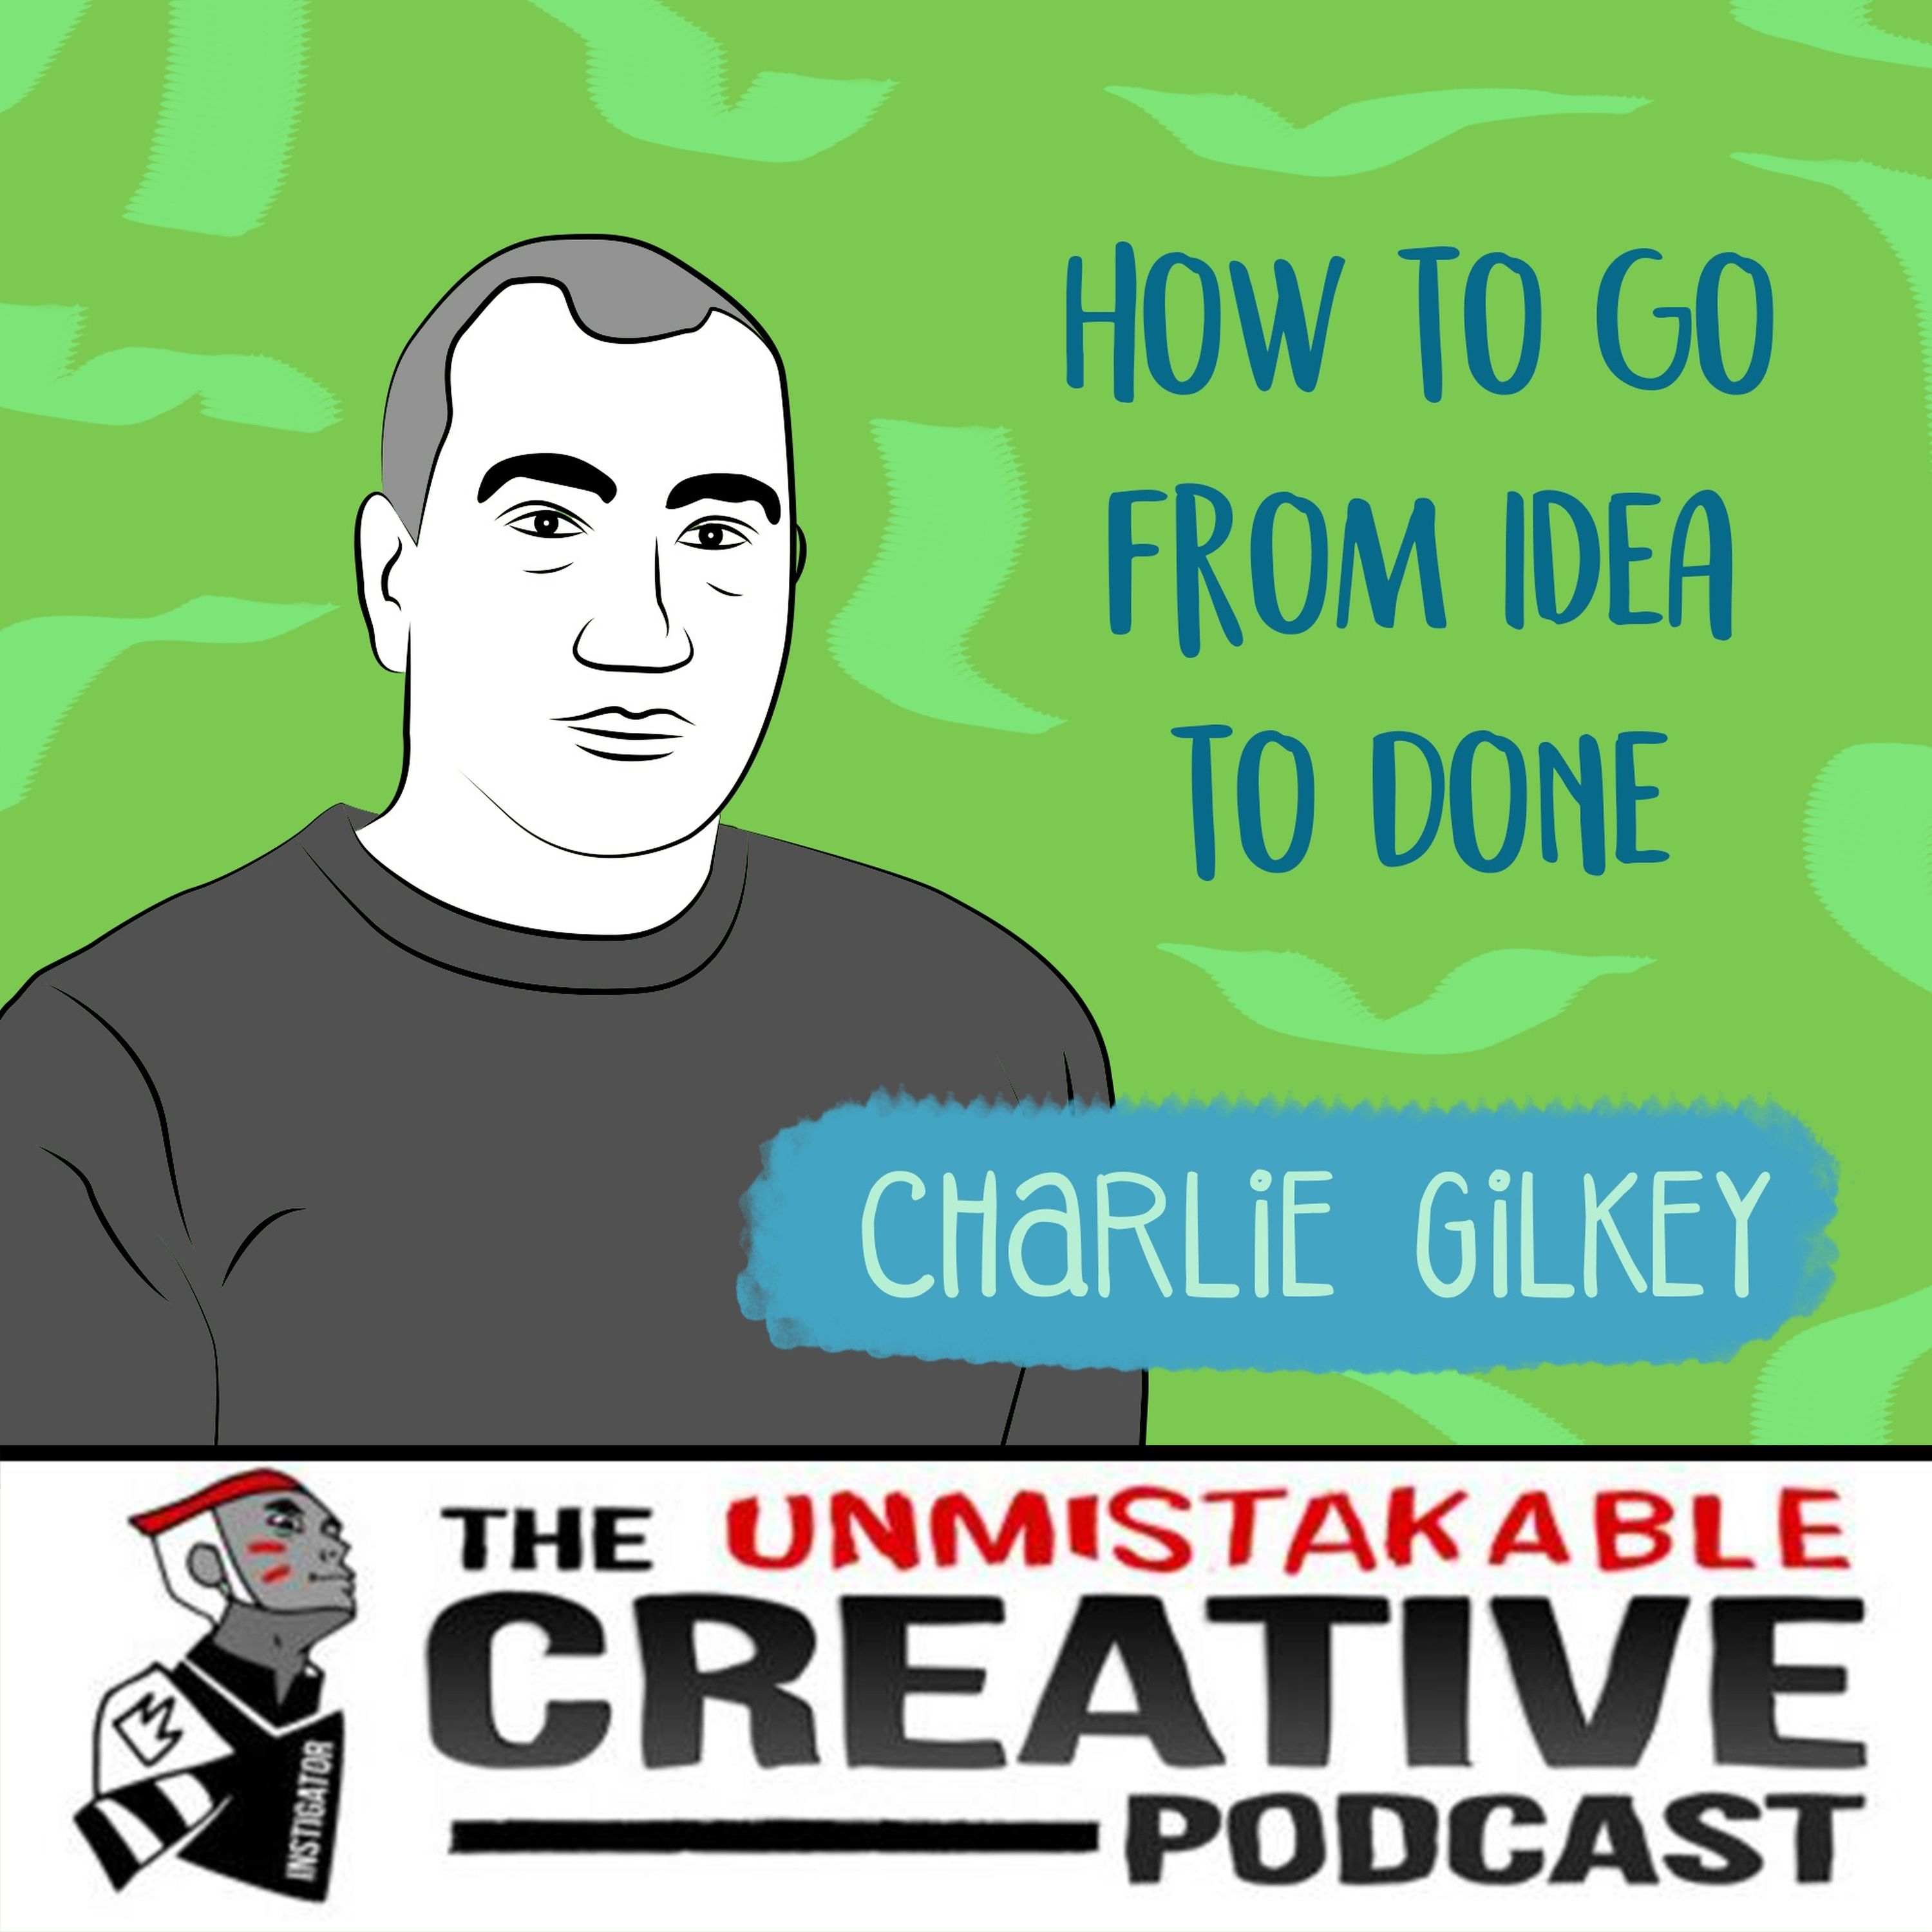 Charlie Gilkey: How to Go from Idea to Done